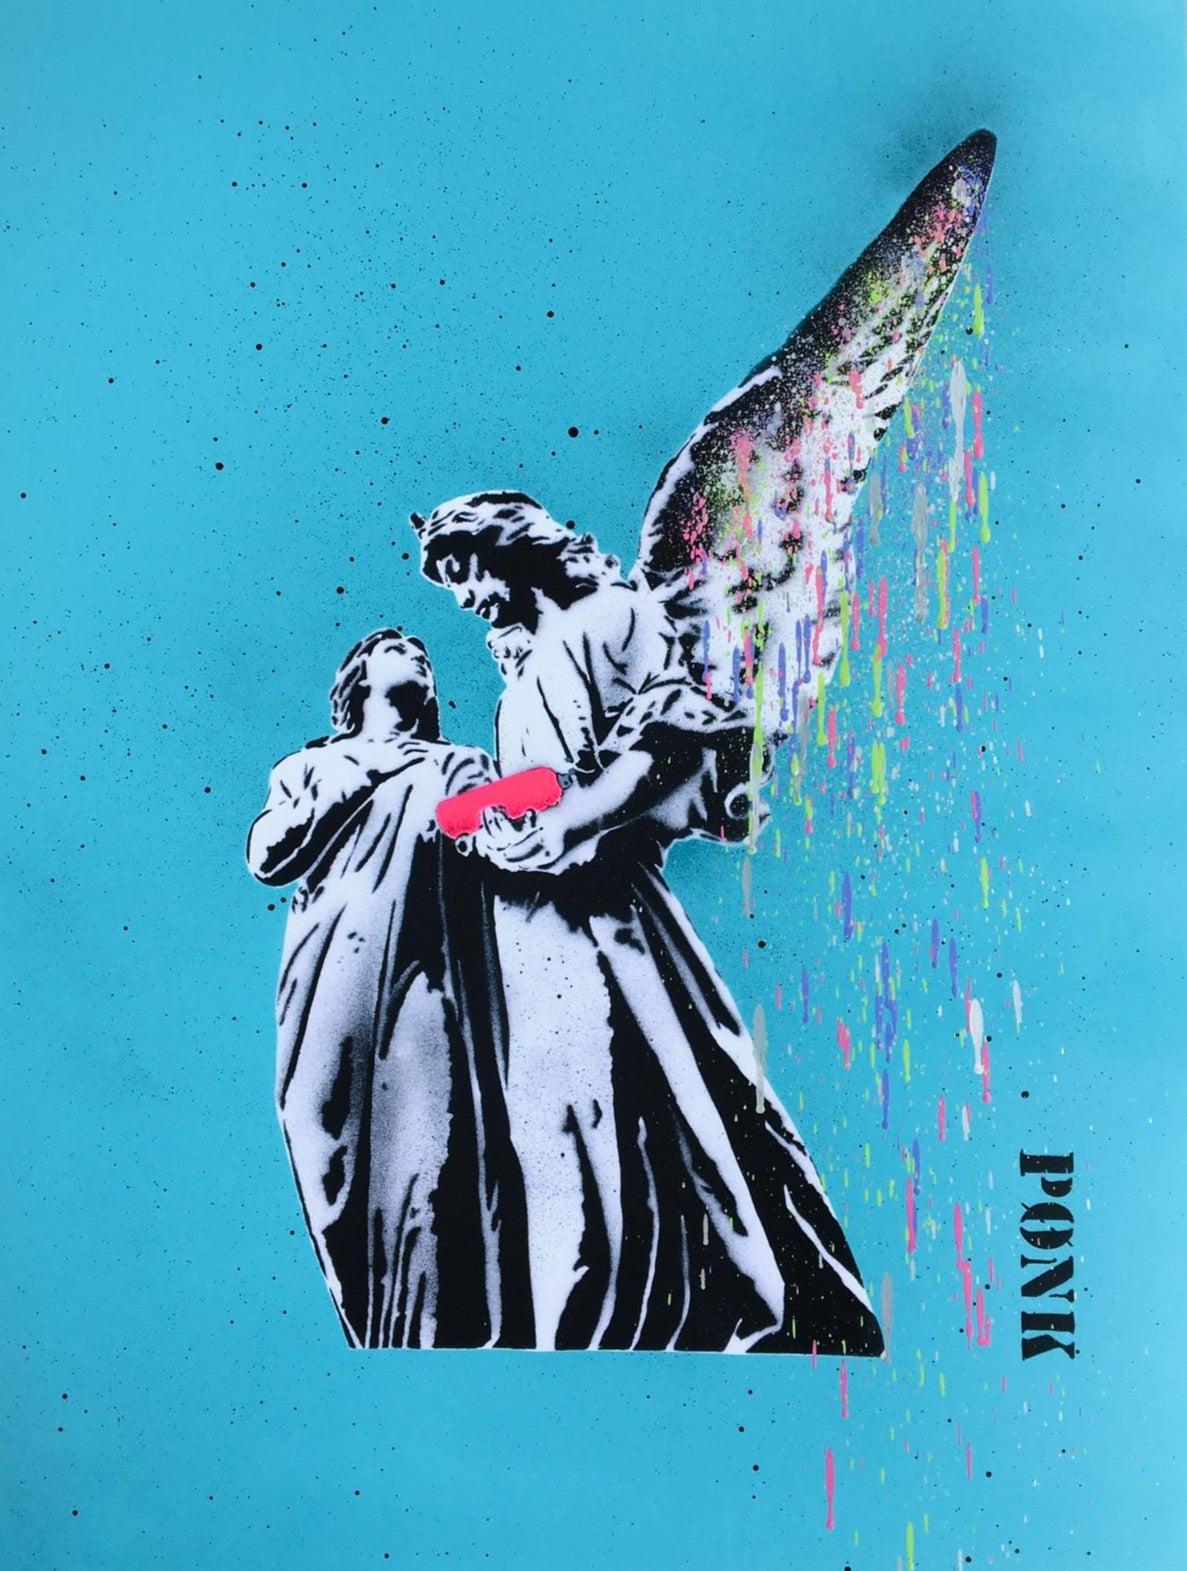 Spray for Love - 1/1 (Teal) by PONK (Street Art), 2021